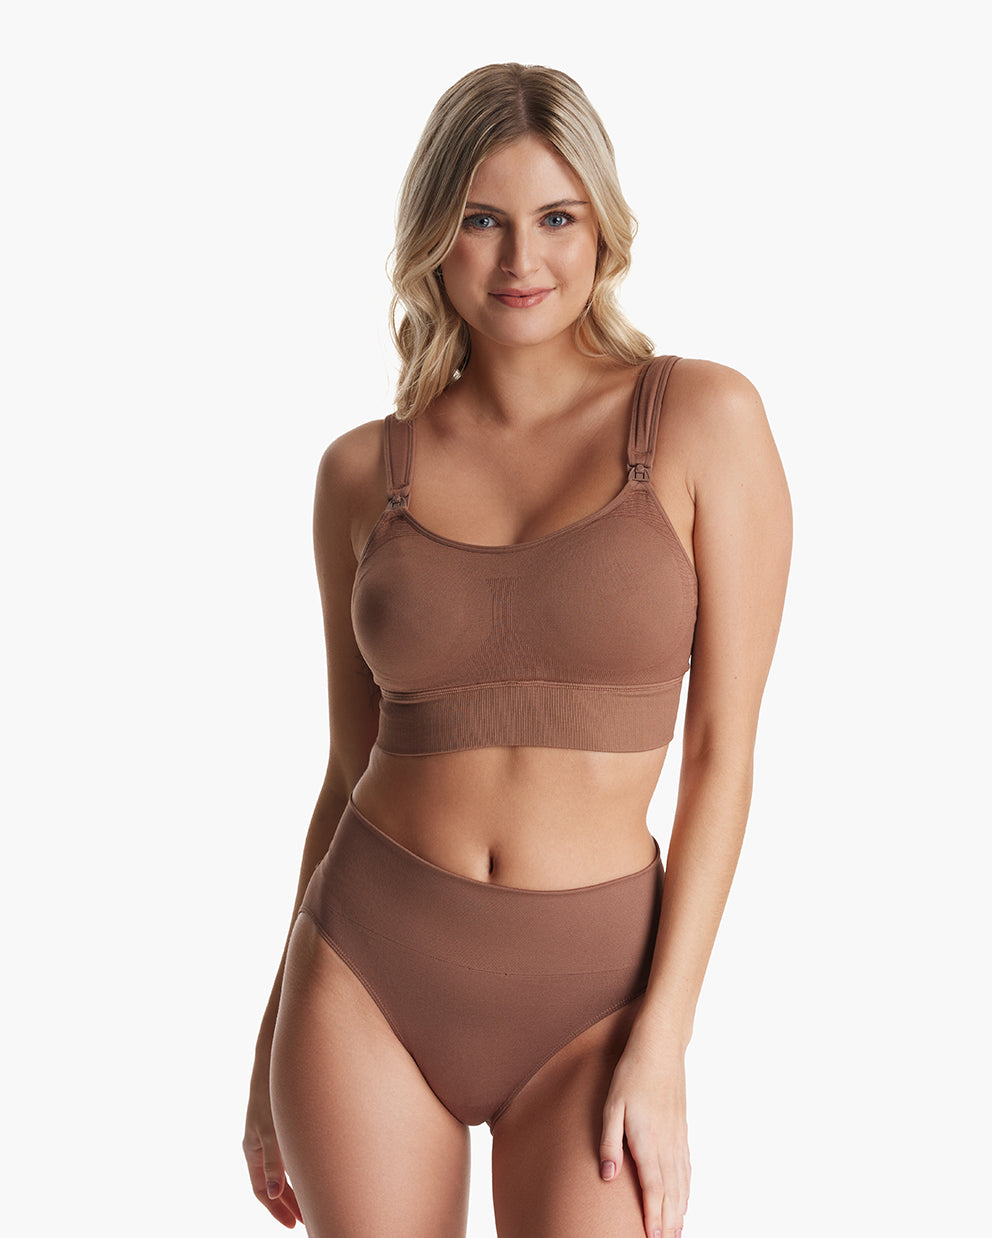 My favorite pumping bra is by Momcozy! @momcozy To find this exact bra